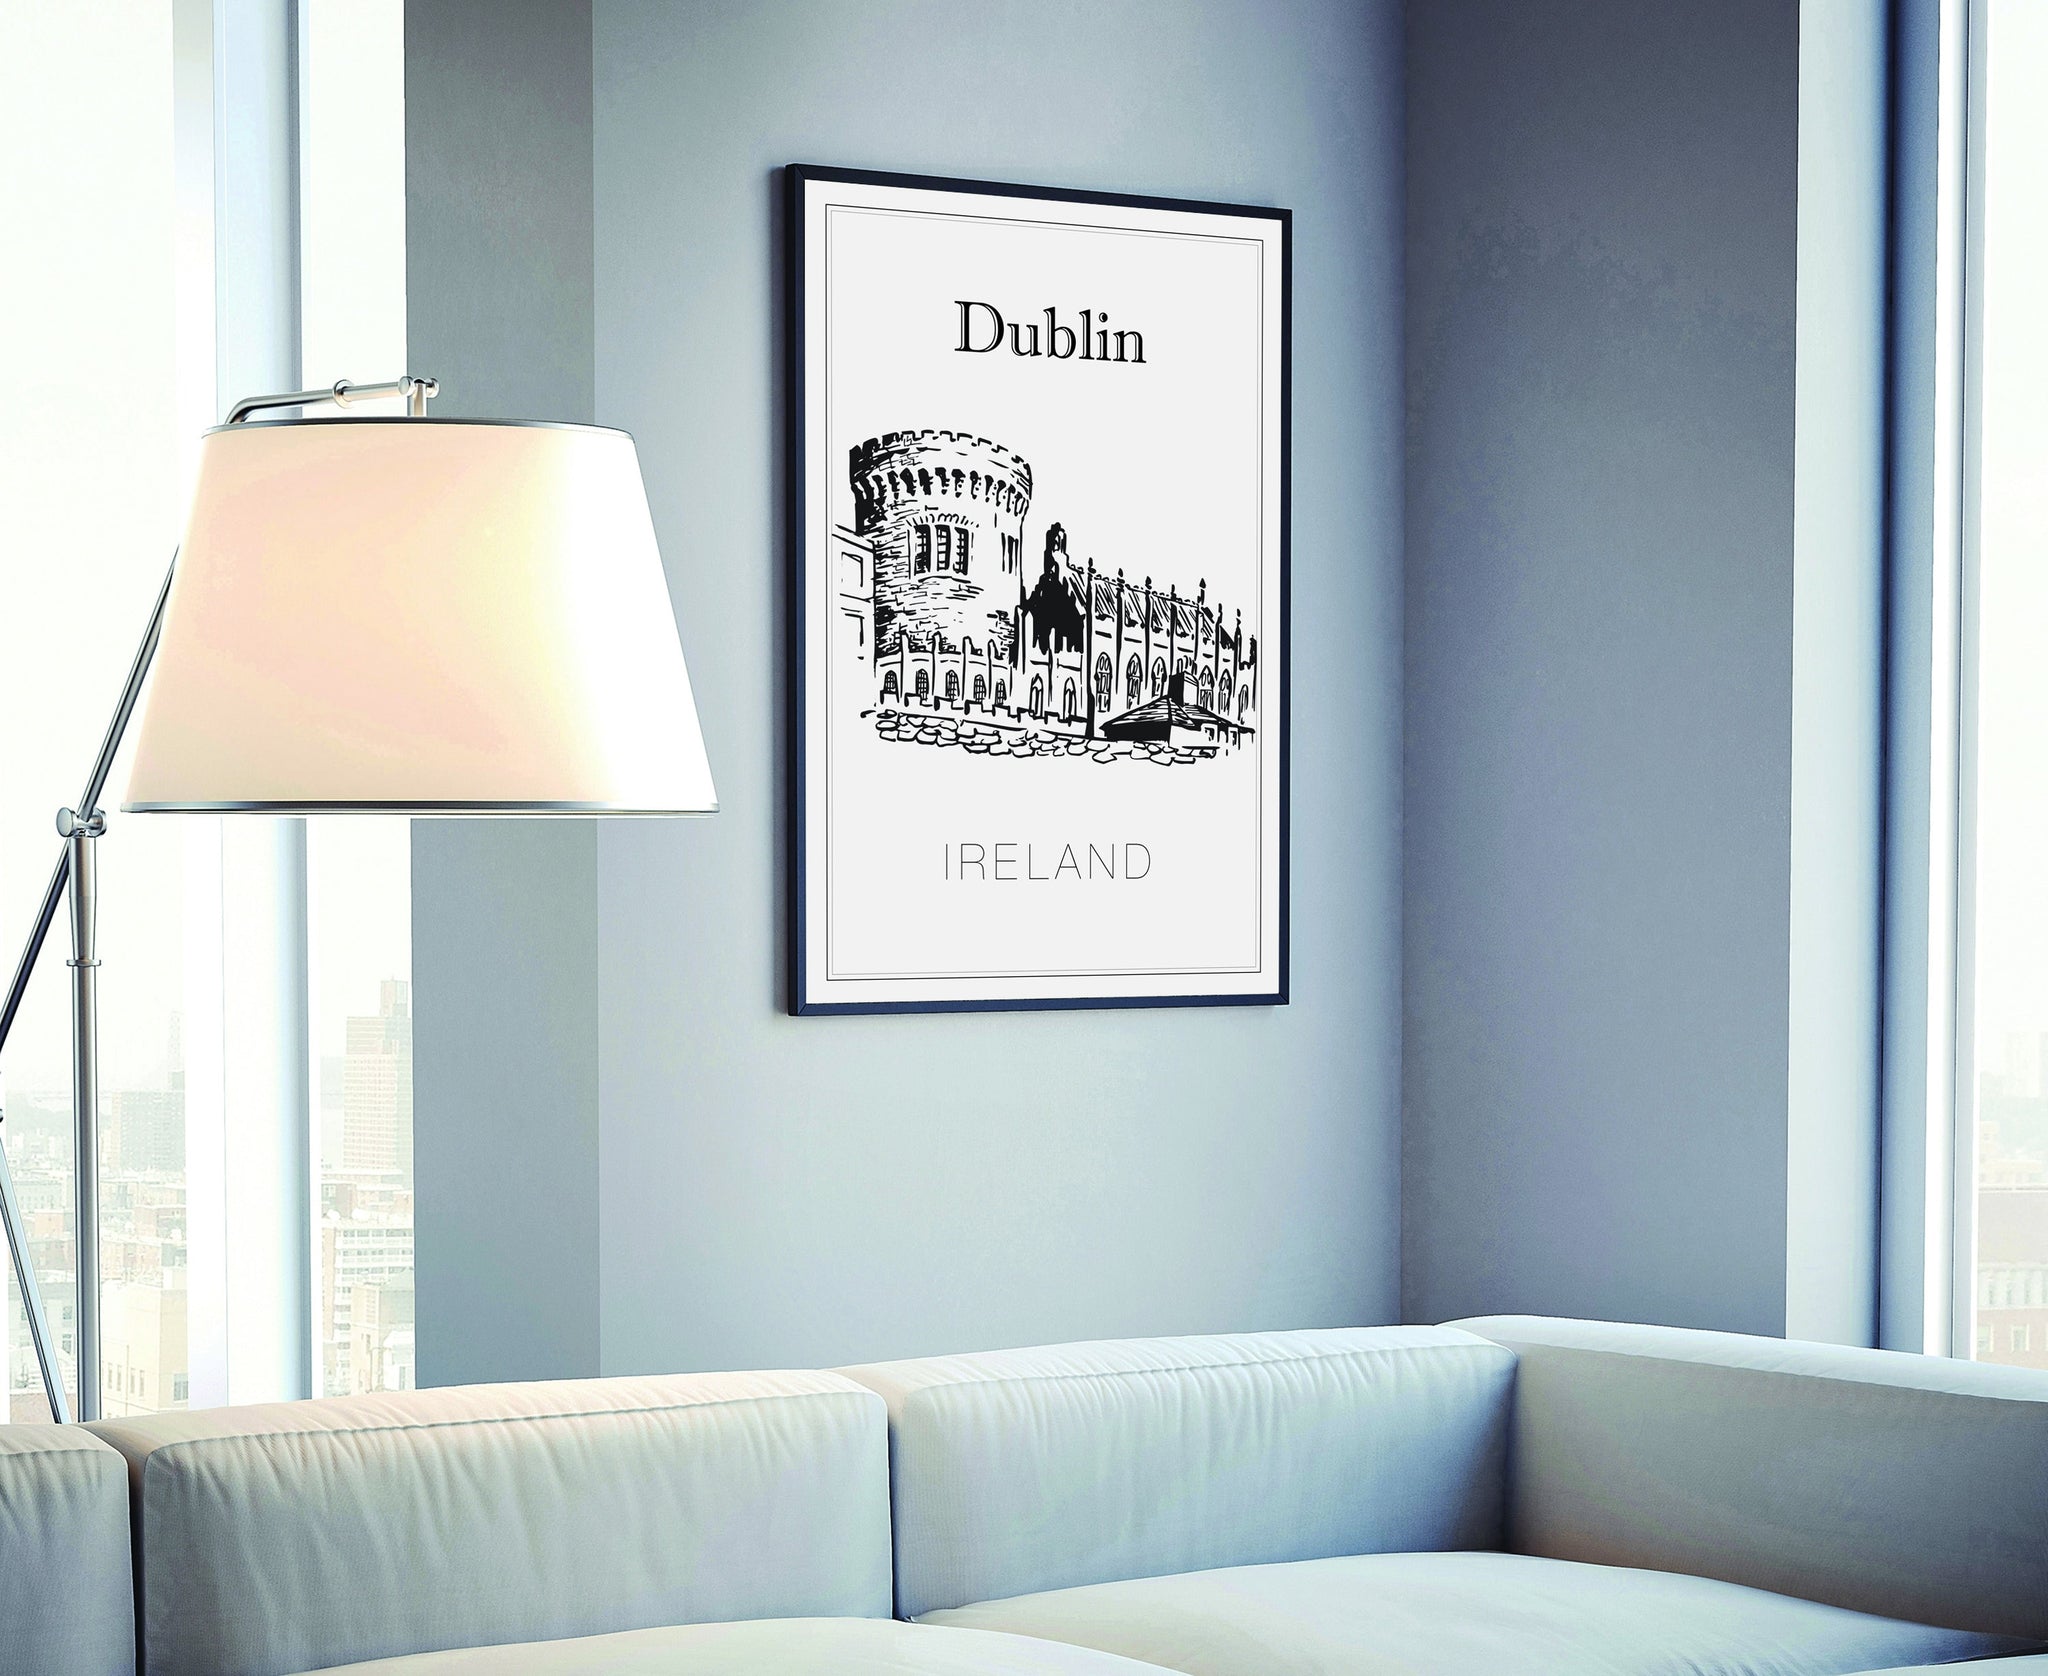 Hand Drawn Poster, Dublin Travel Poster, Ireland Dublin Poster Wall Art, Dublin Cityscape and Landmark Map, City Map Poster For Home